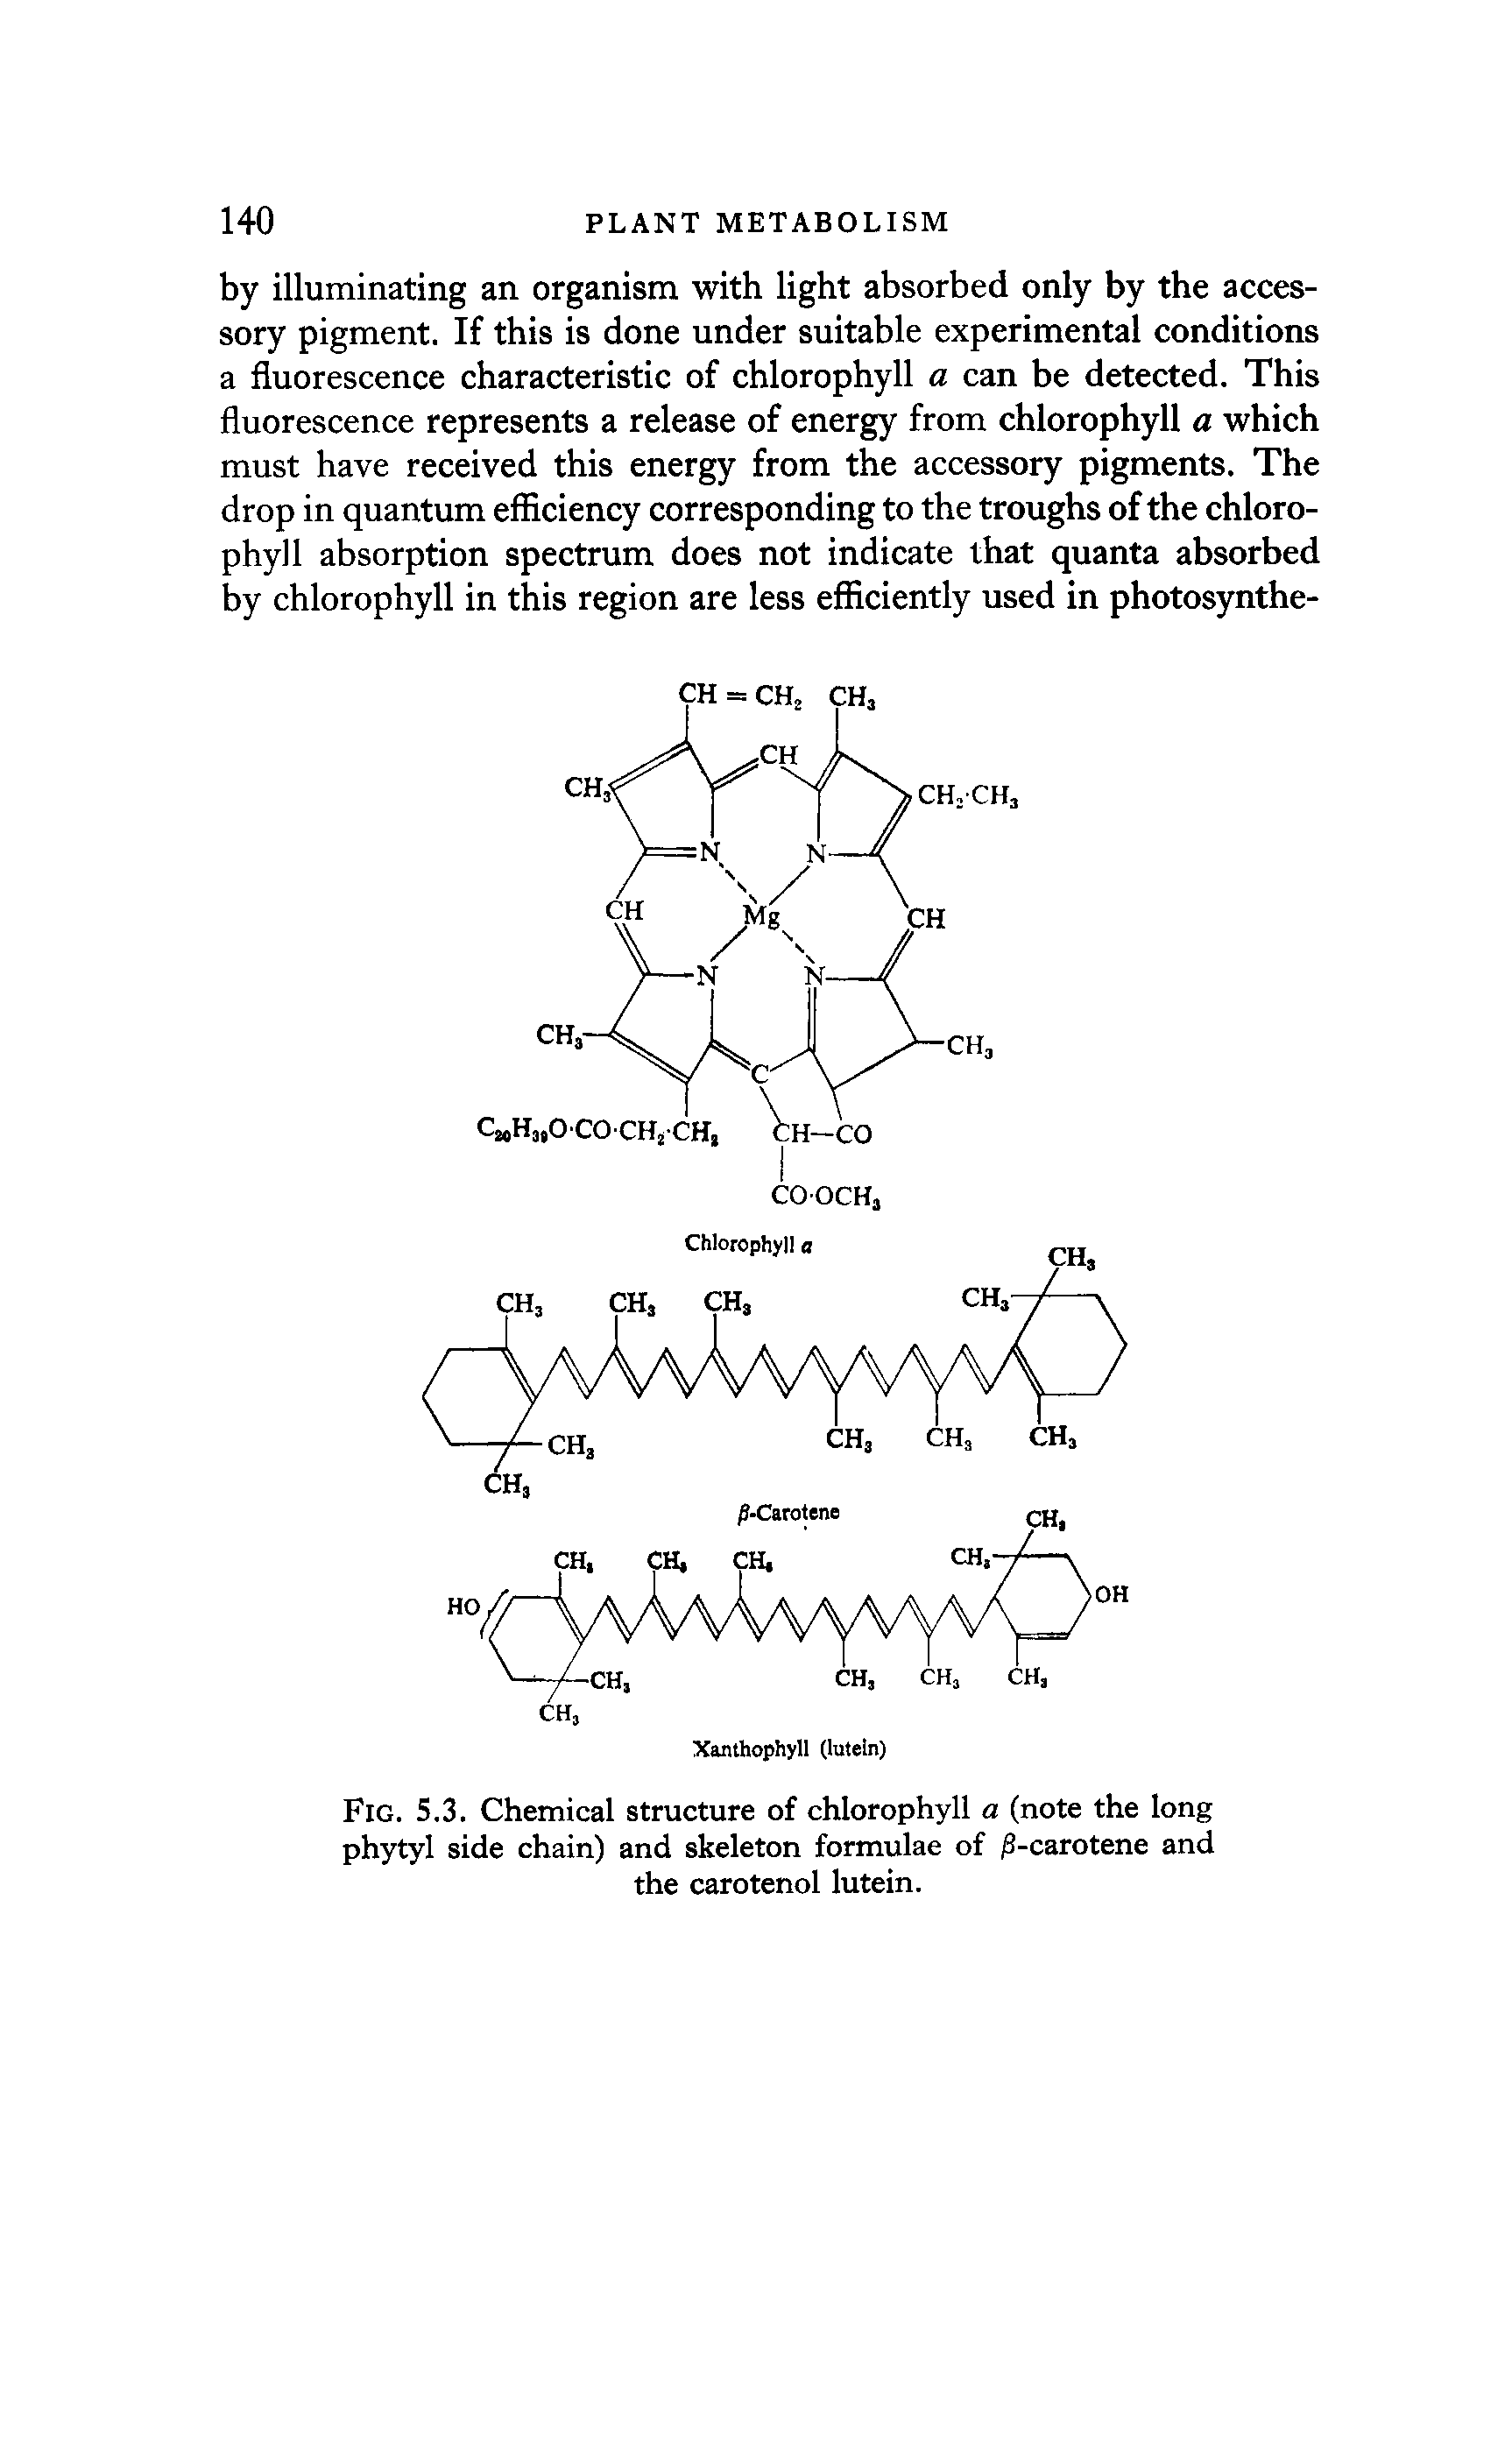 Fig. 5.3. Chemical structure of chlorophyll a (note the long phytyl side chain) and skeleton formulae of 8-carotene and the carotenol lutein.